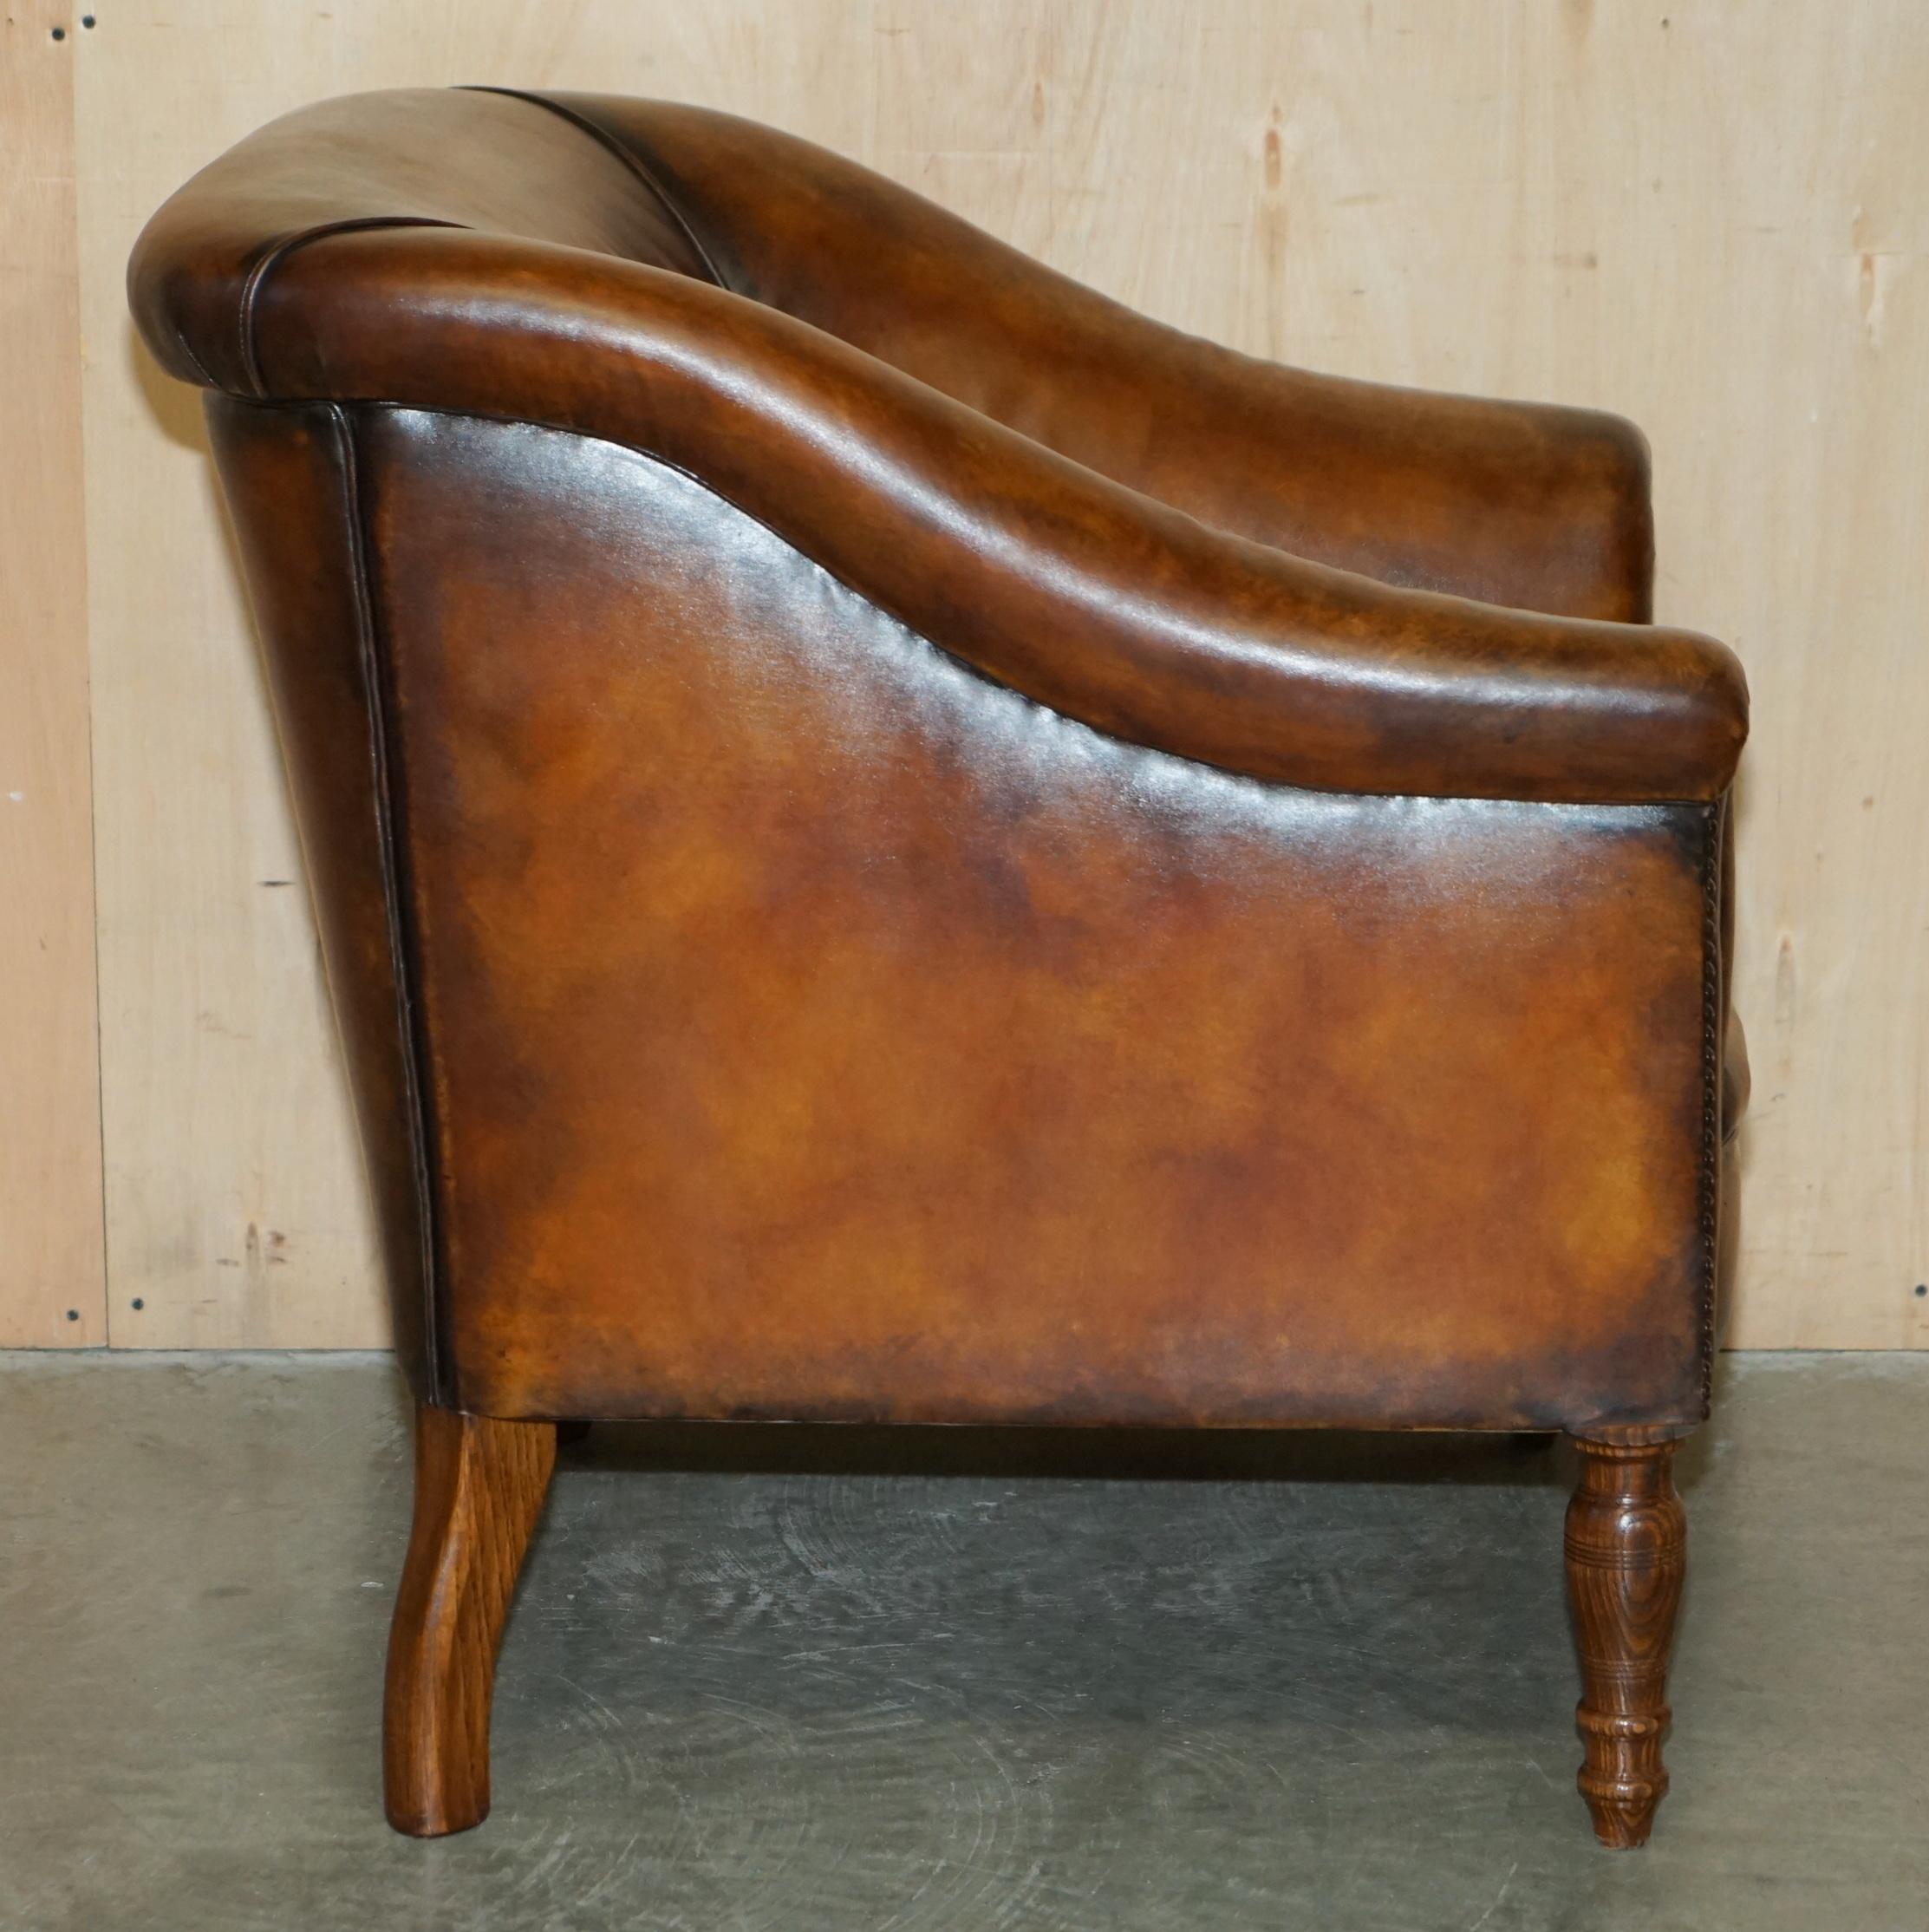 PAIR OF GEORGE SMITH SOMERVILLE RESTORED BROWN LEATHER ARMCHAiRS For Sale 8